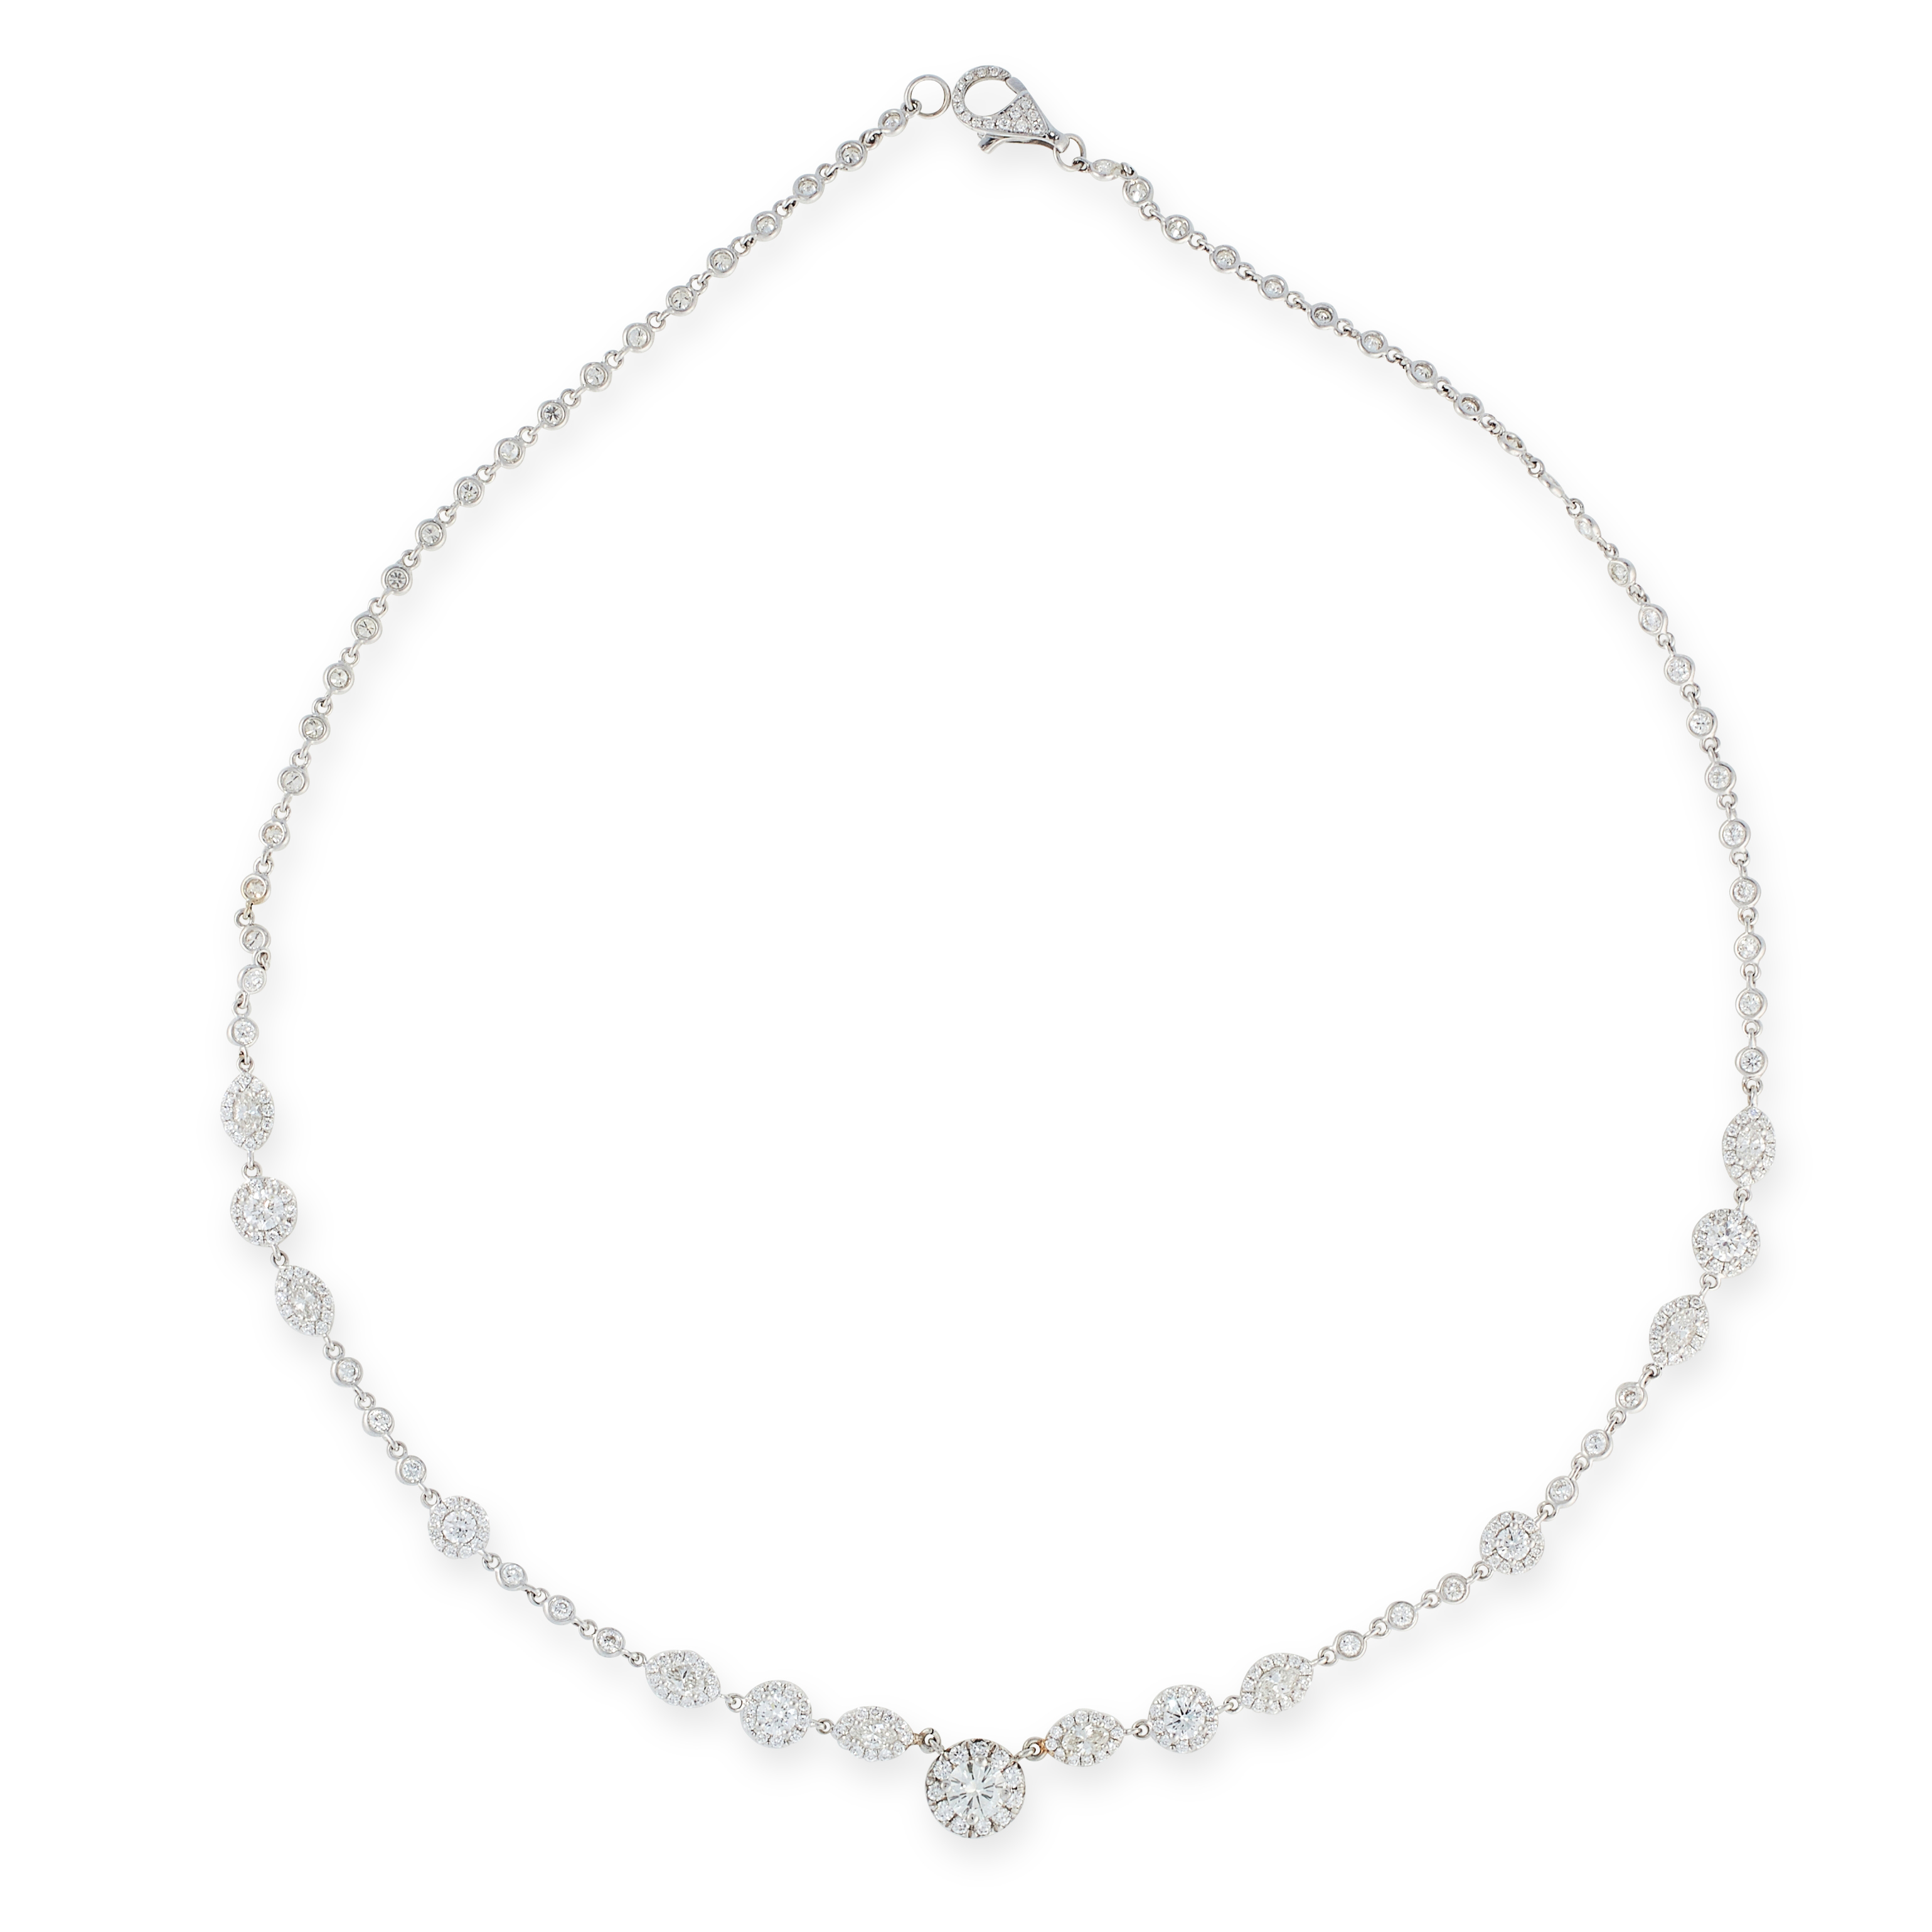 A DIAMOND LINE NECKLACE in 18ct white gold, formed of a row of round cut diamonds punctuated by